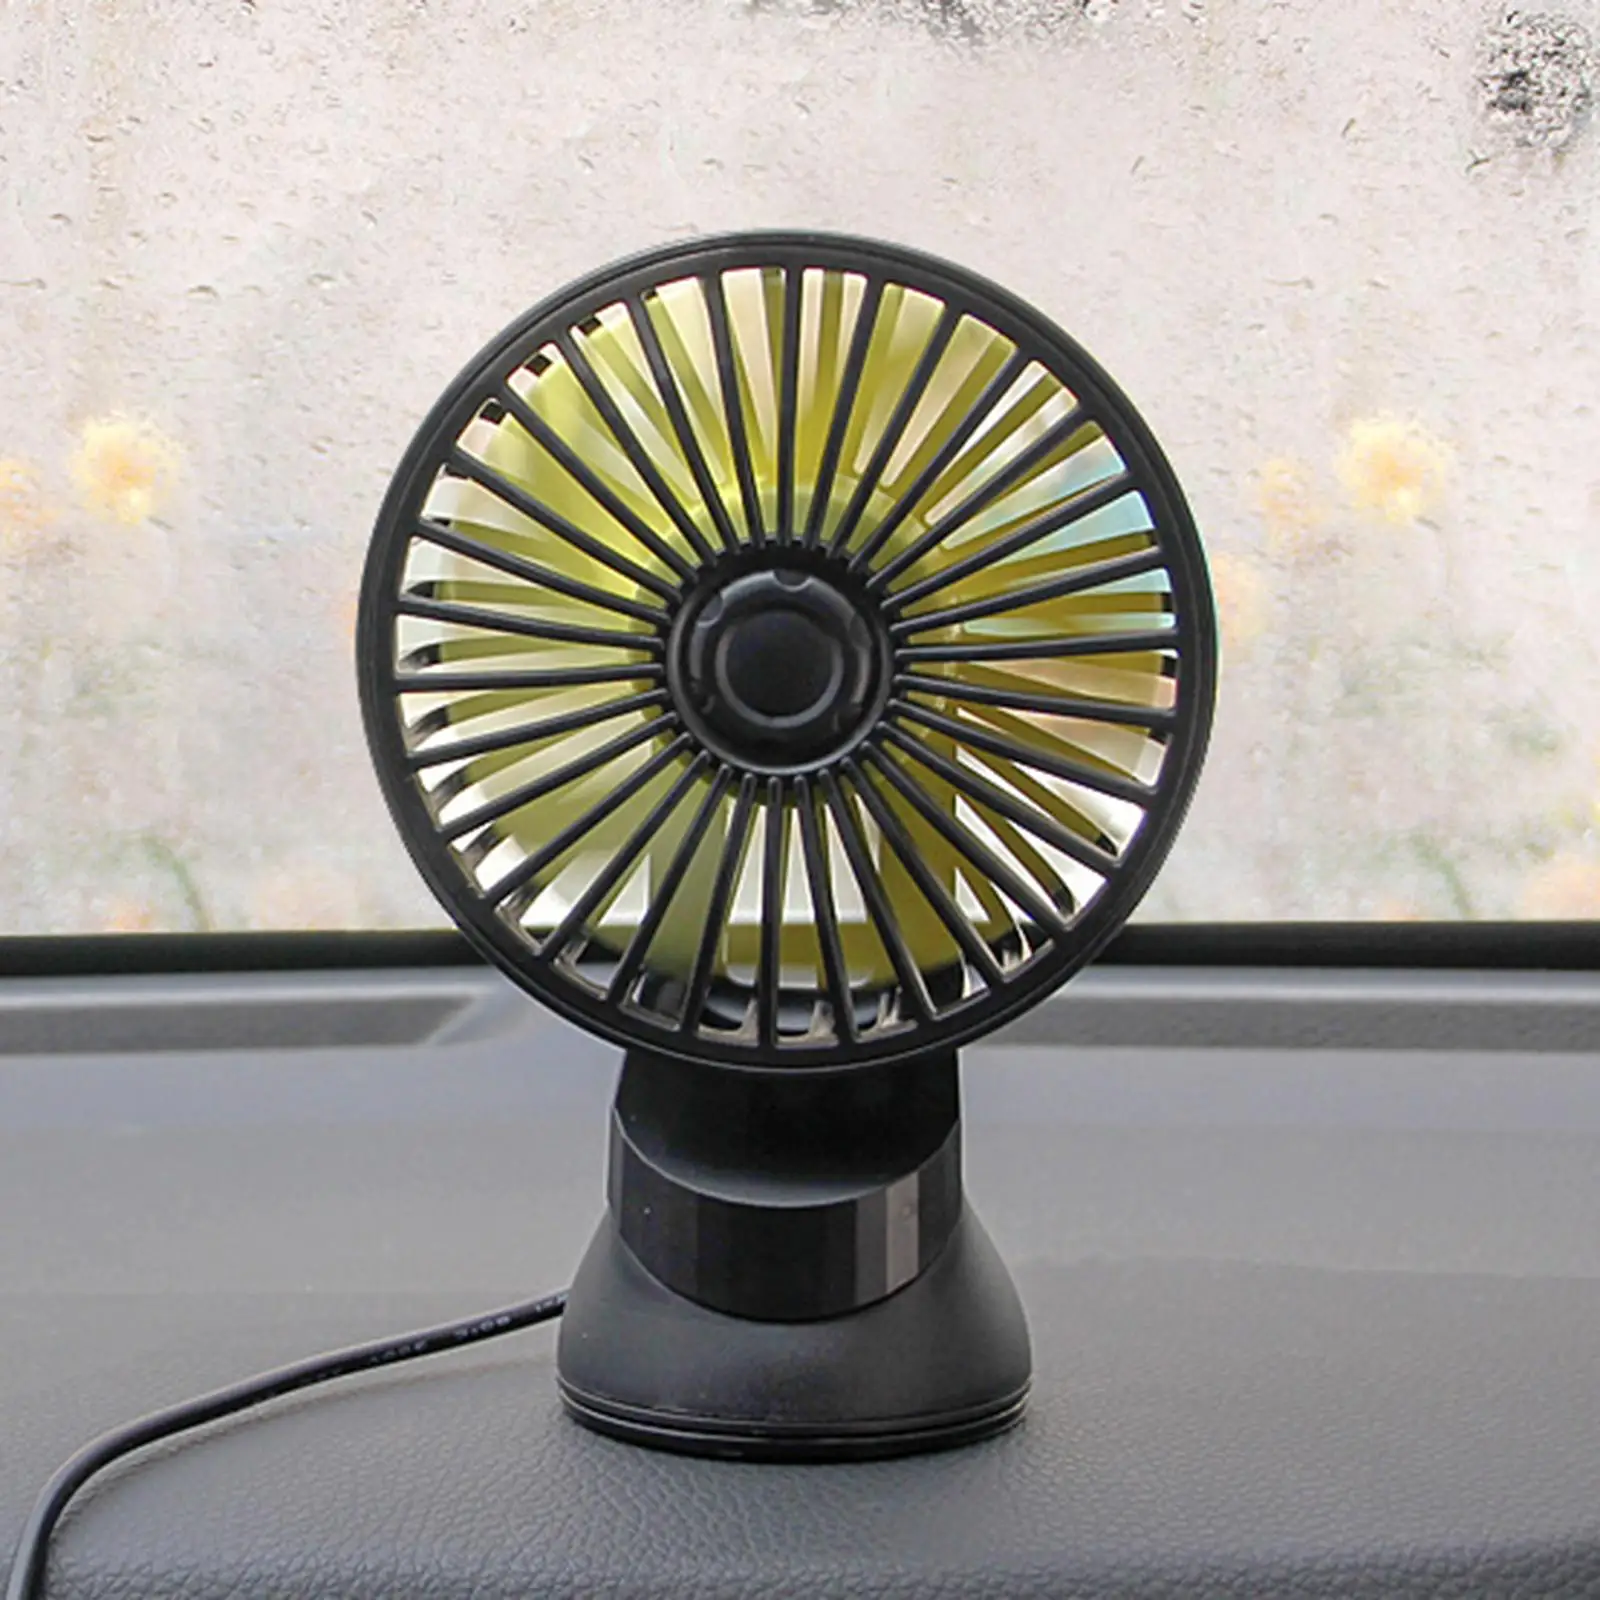 USB Fan Variable Speed Air Cooler Small for Car Dashboard Vehicle Boat